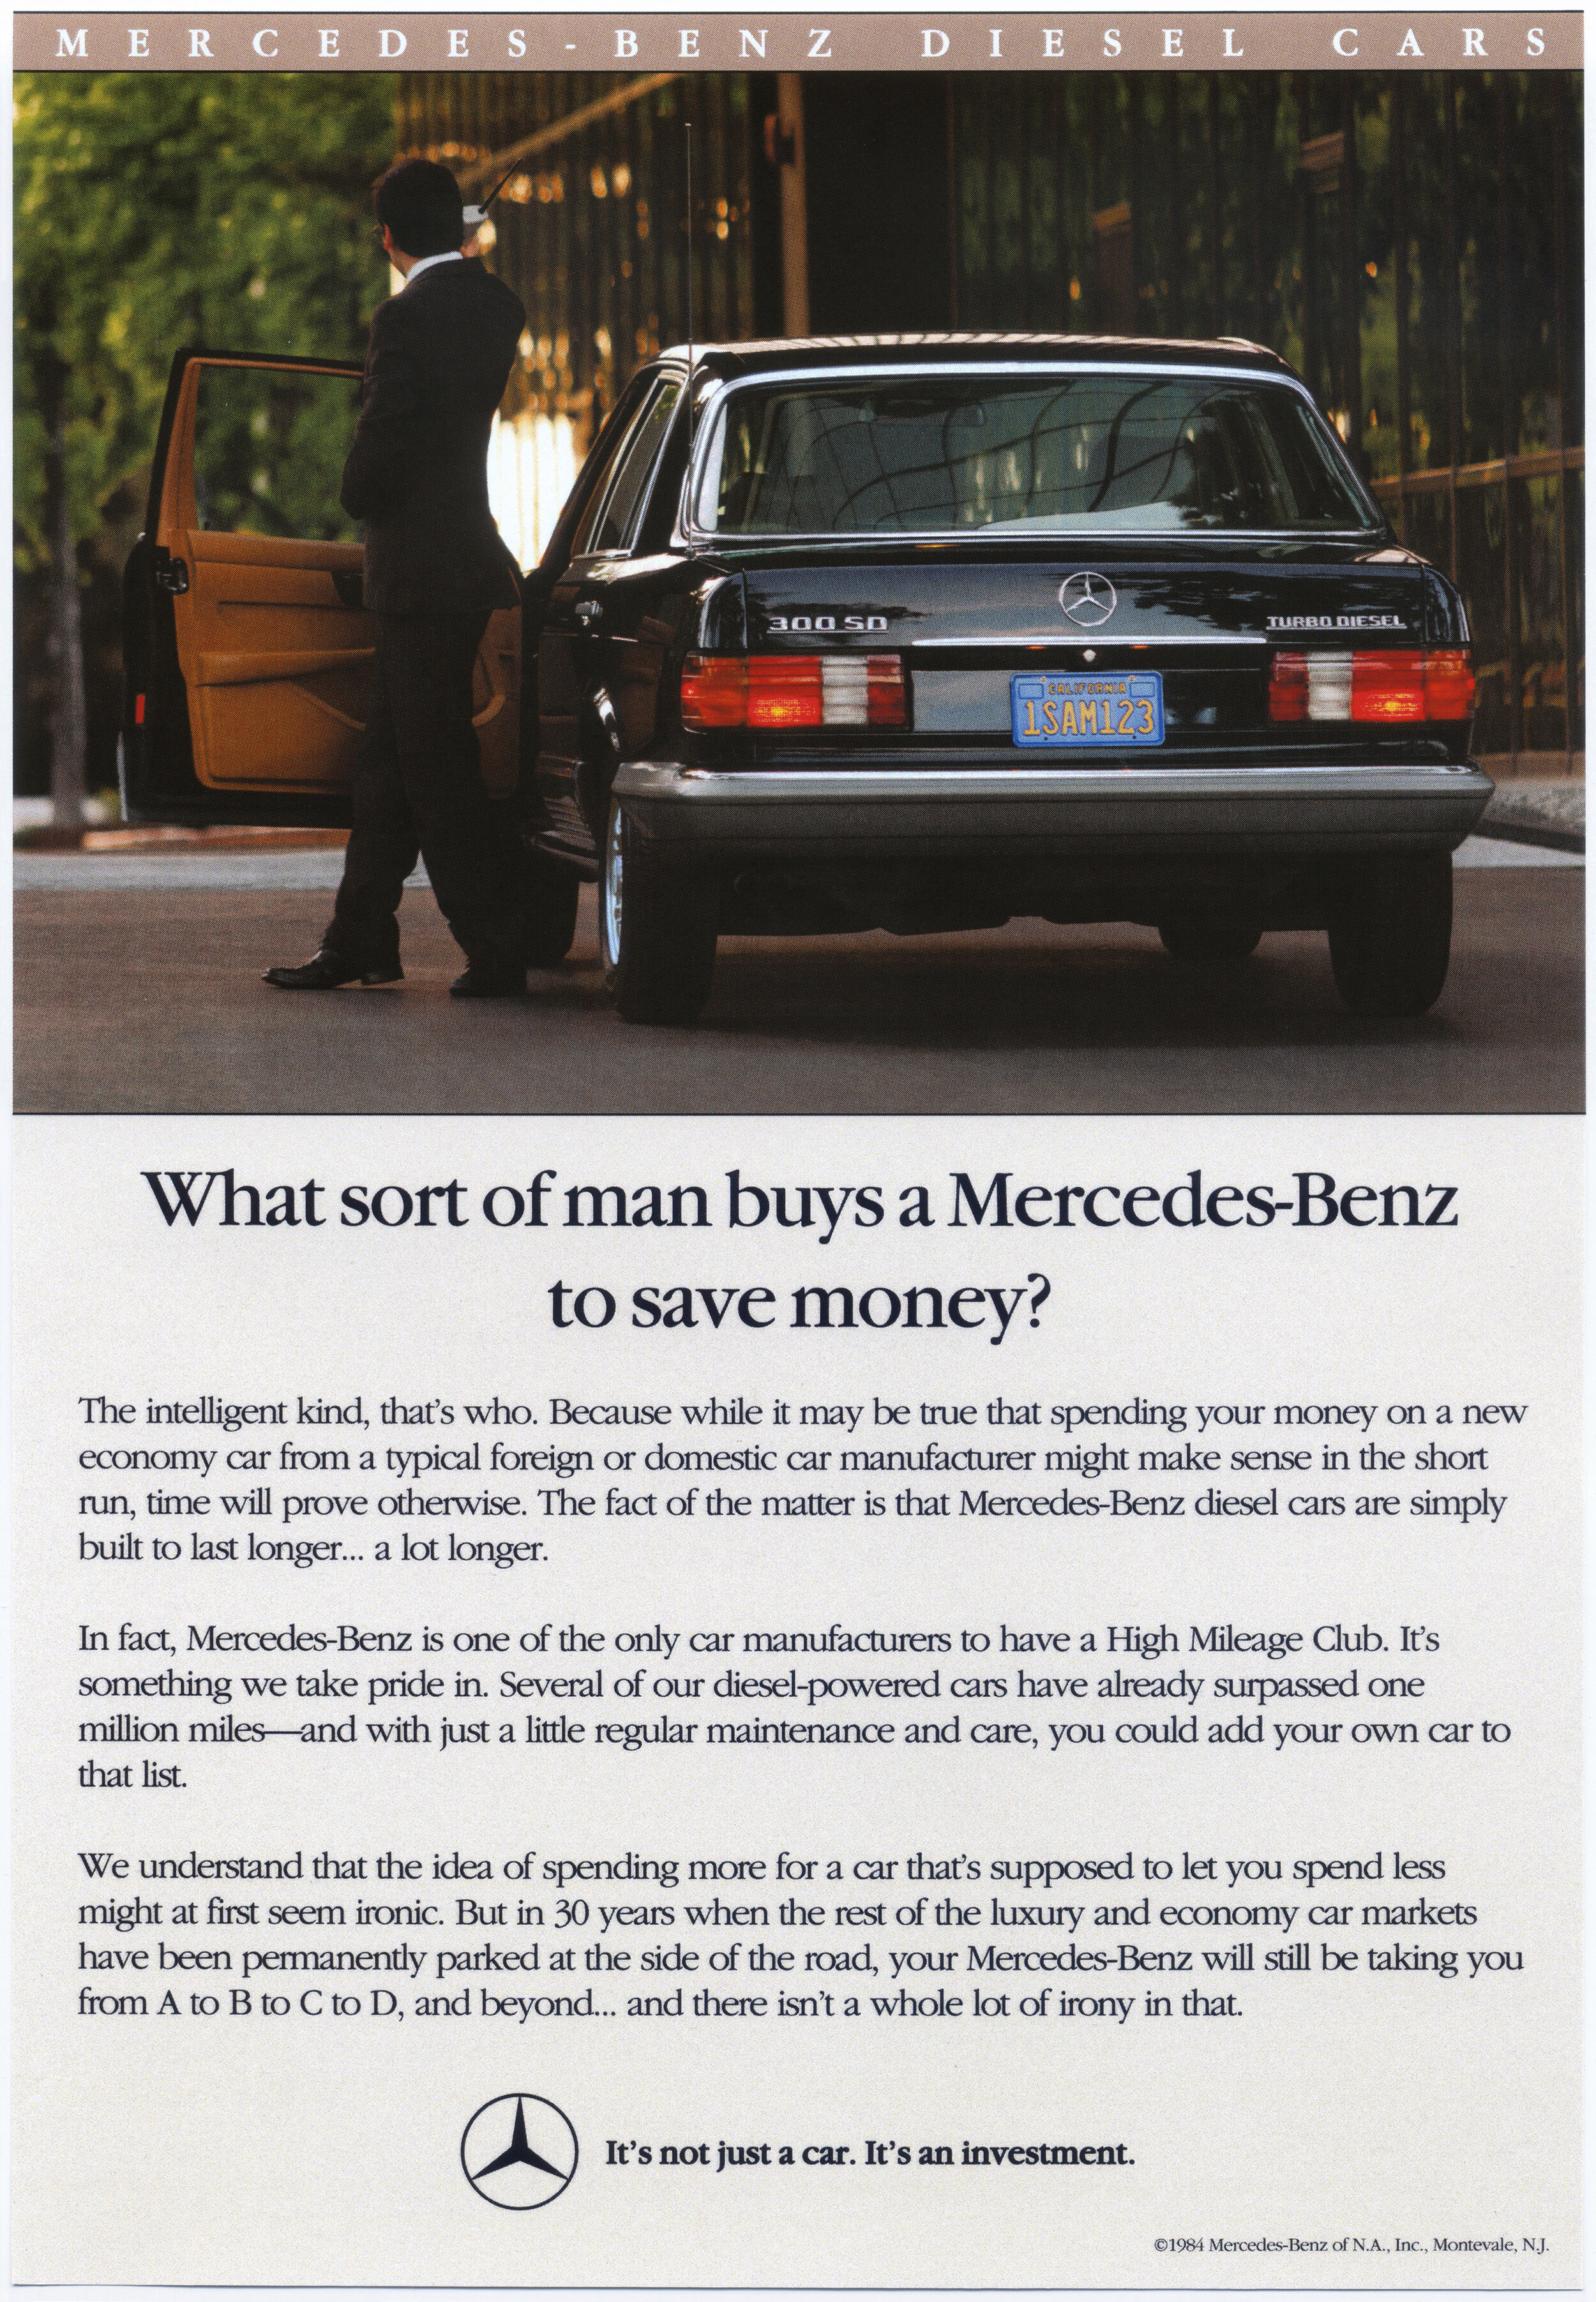 1981, 1980, 1982, 1983, 1984, 1985, mercedes, 300SD, ad, advertisement, commercial, black